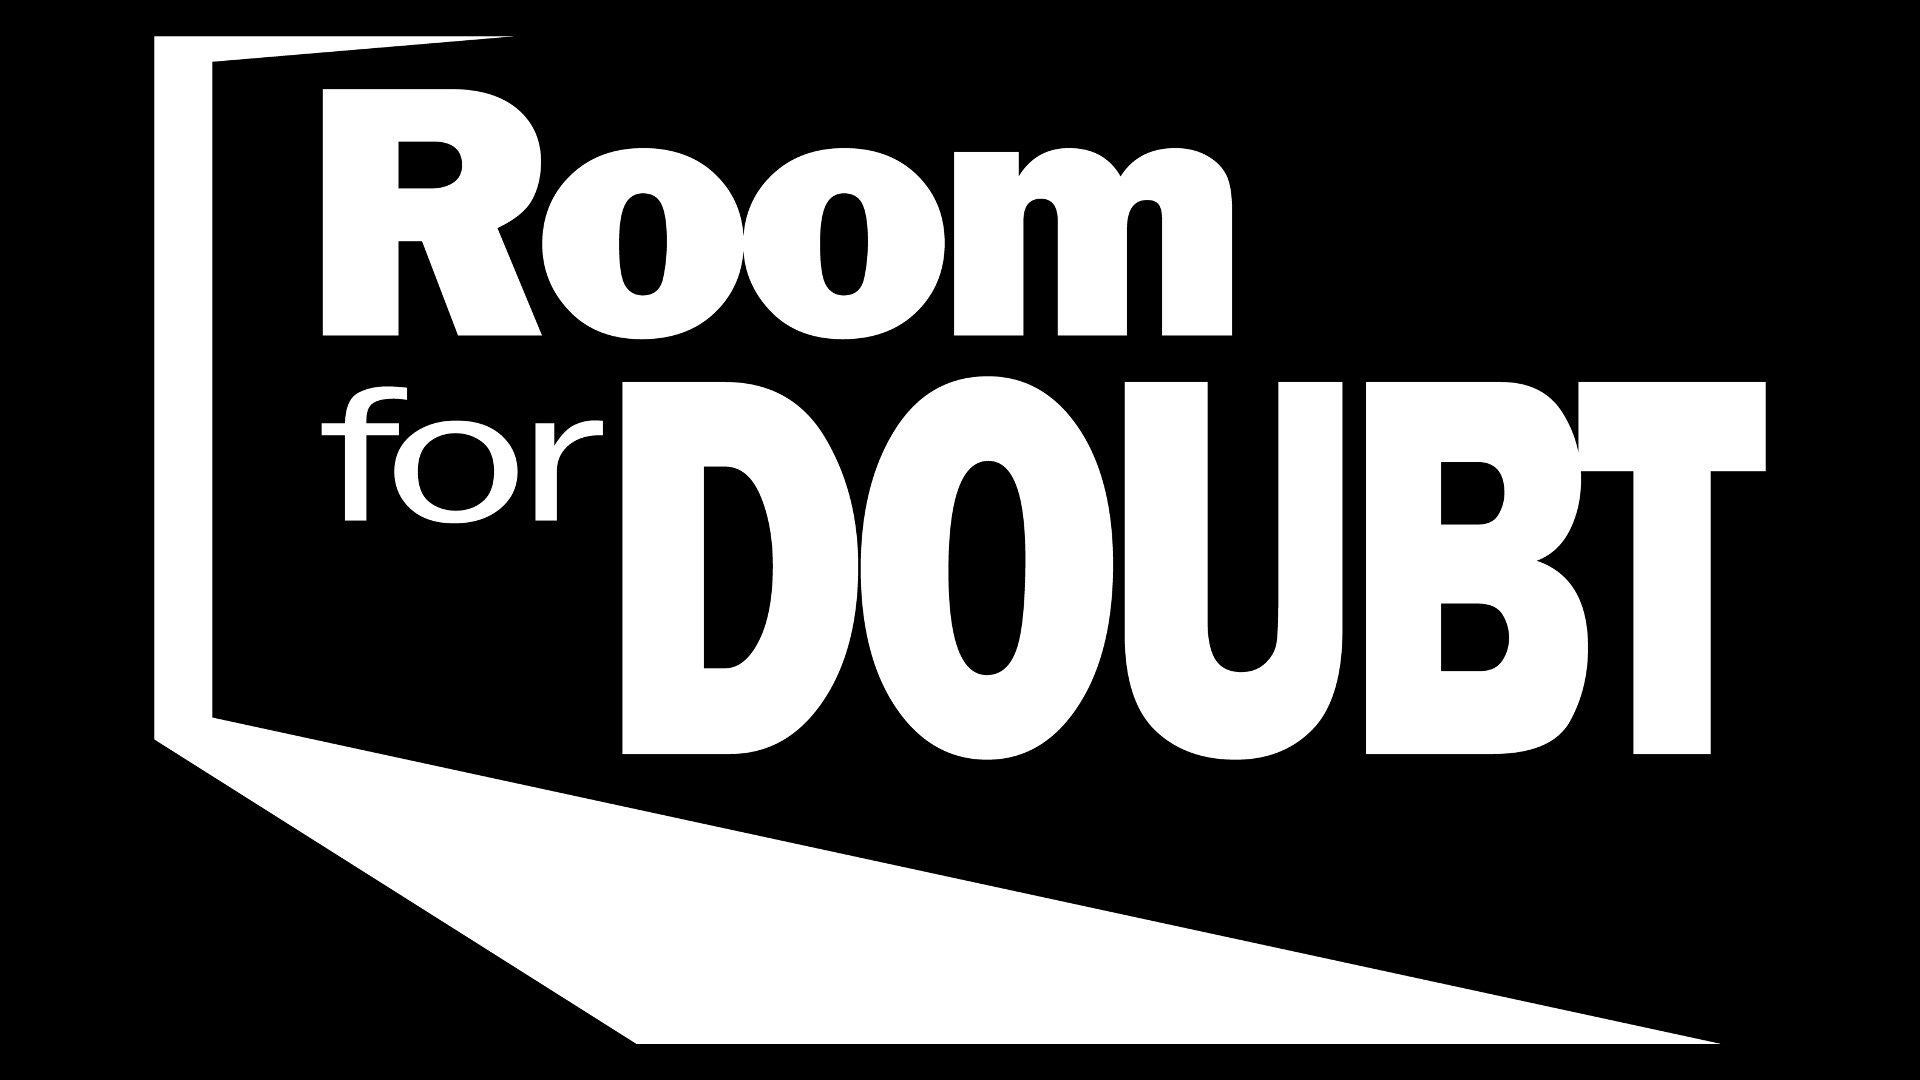 Room for Doubt